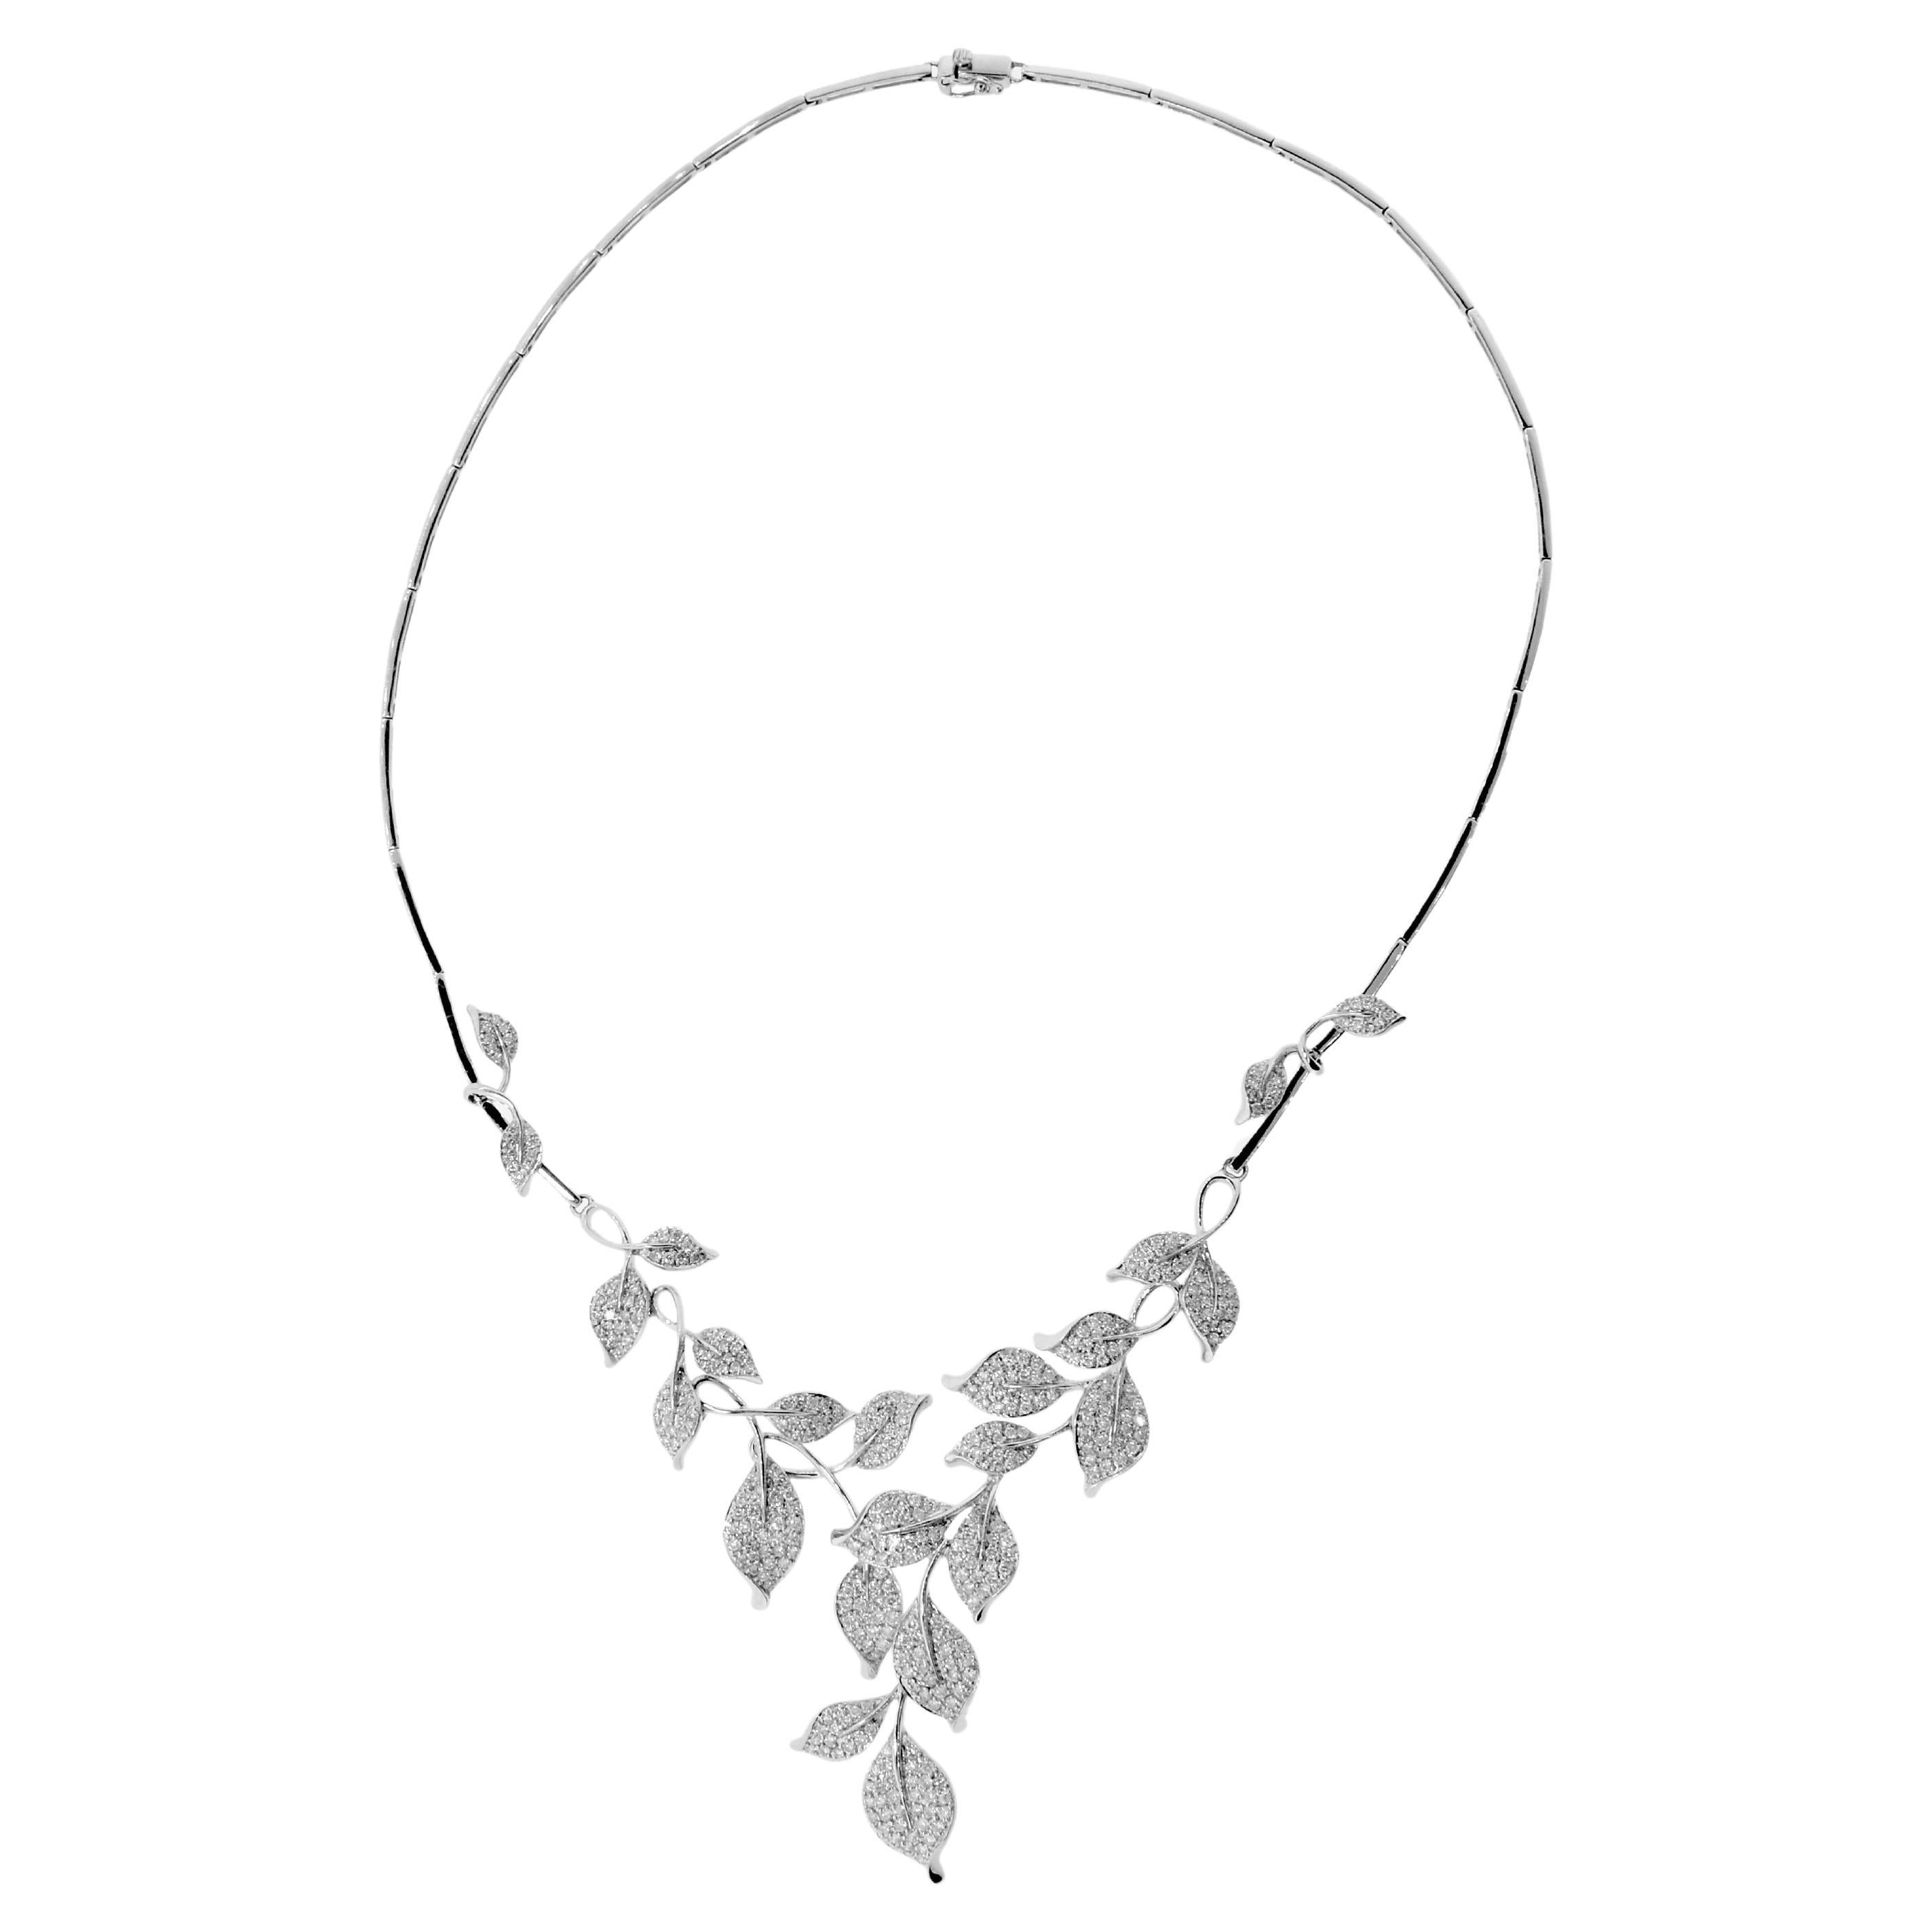 Diamond and 18K White Gold Contemporary Necklace of Stylized Foliage. For Sale